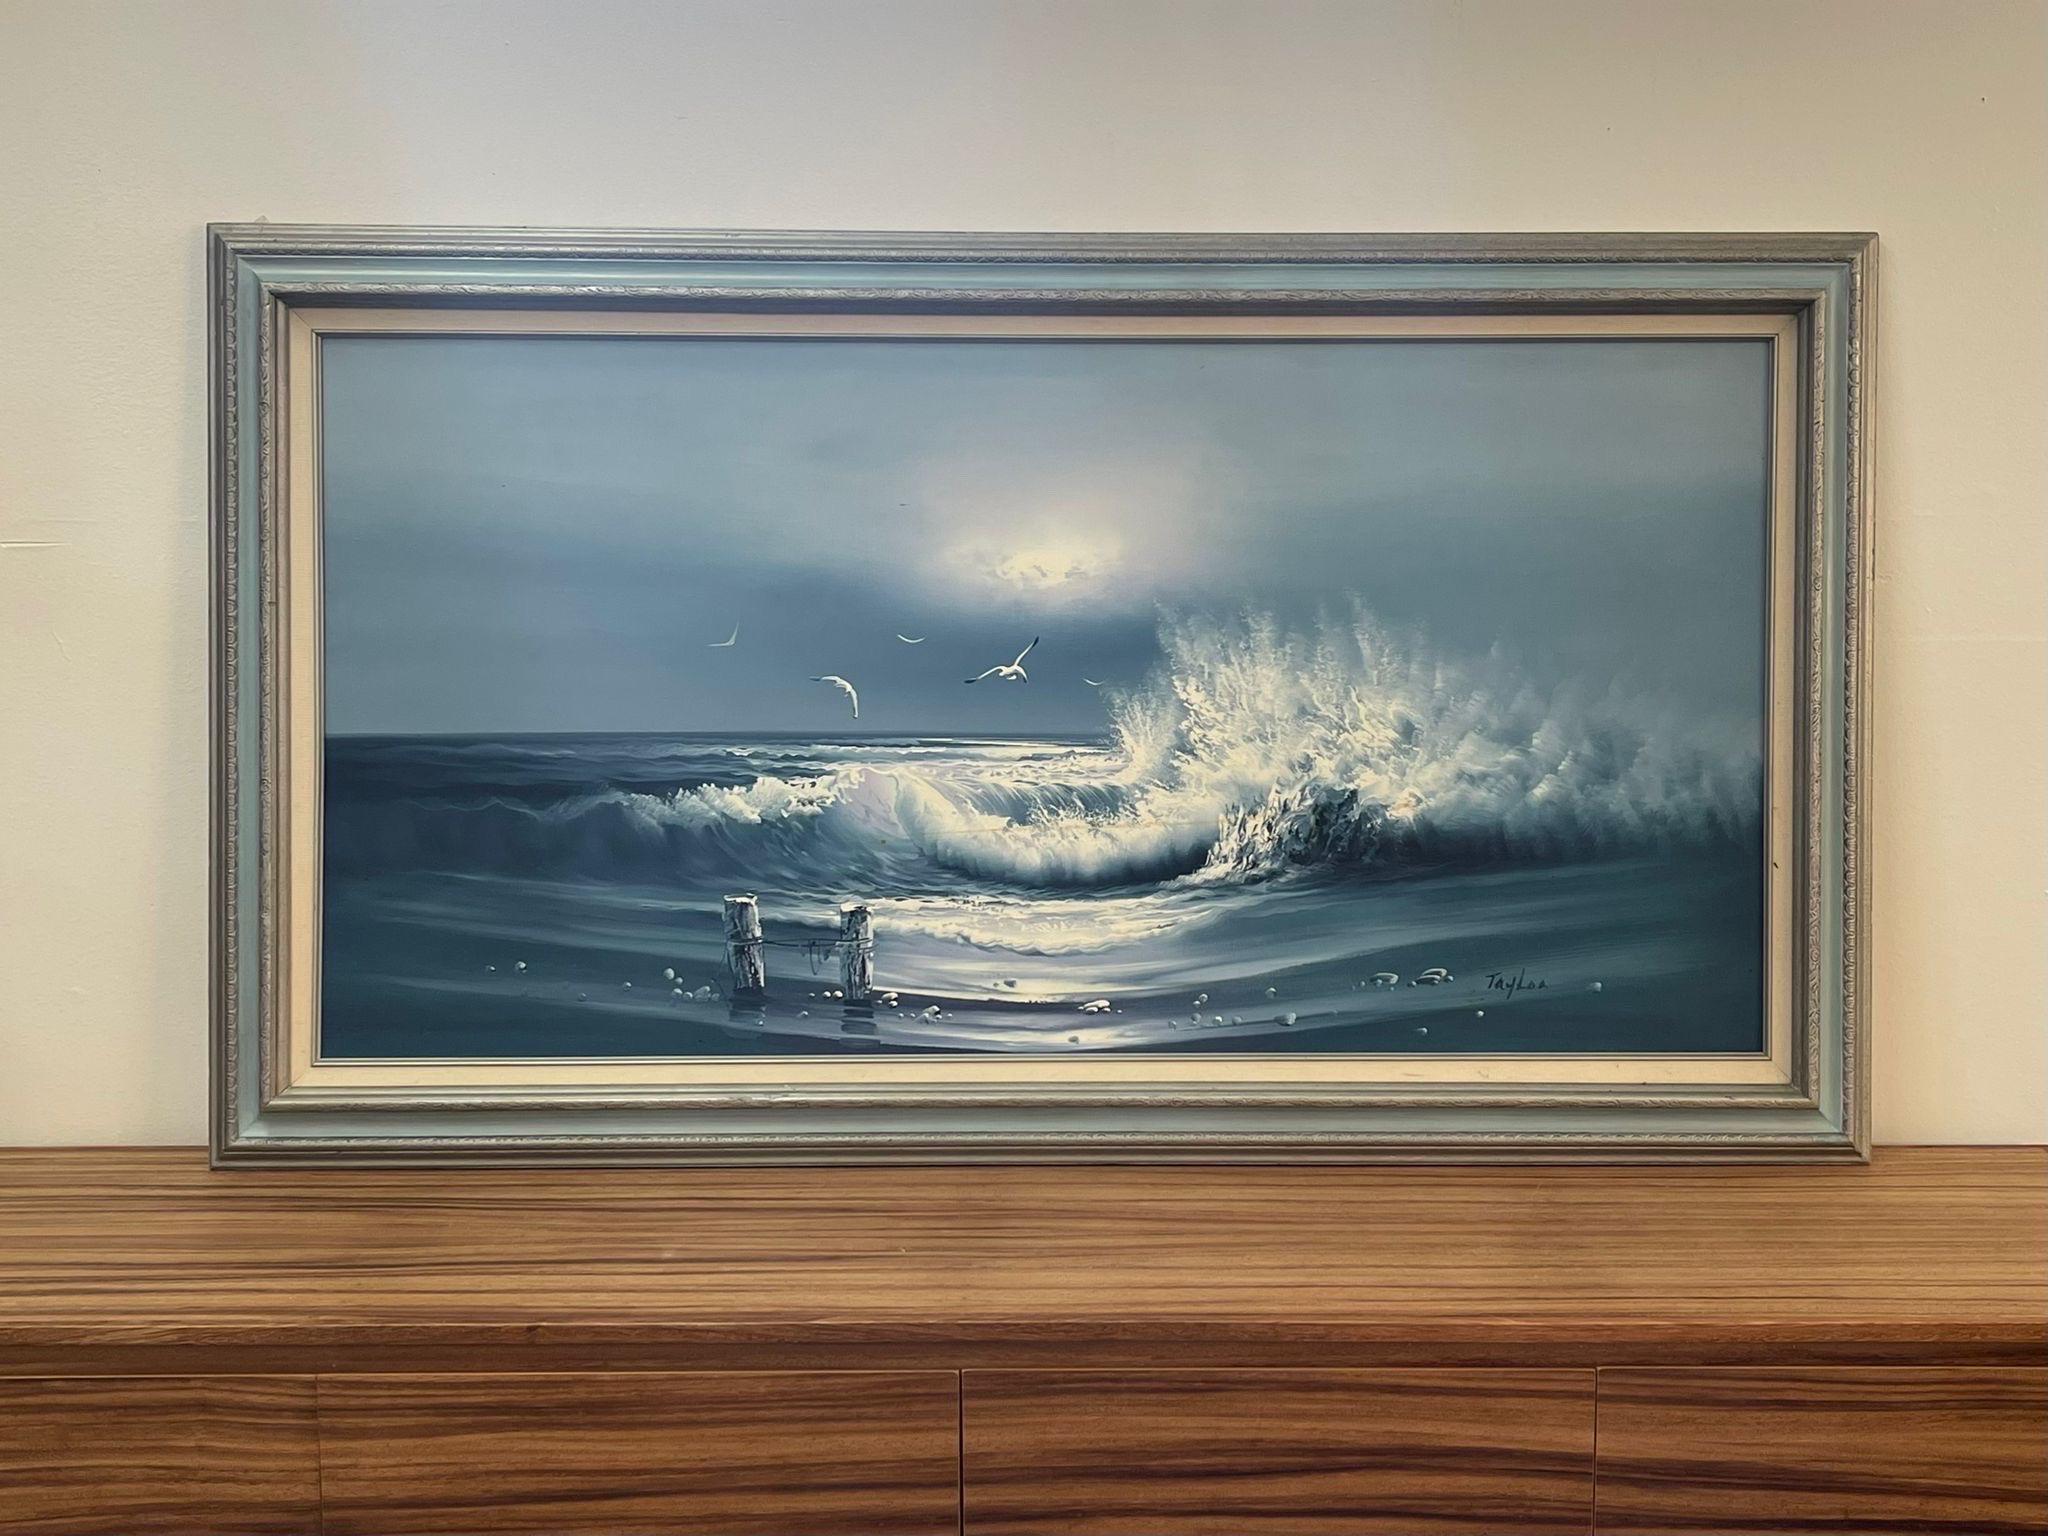 Vintage Artwork signed Taylor in the lower corner. Frame beautifully matches the blue tones in the painting. Slight markings on the painting as Pictured. Vintage Condition Consistent with Age as Pictured.

Dimensions. 55 W ; 1 D ; 31 H